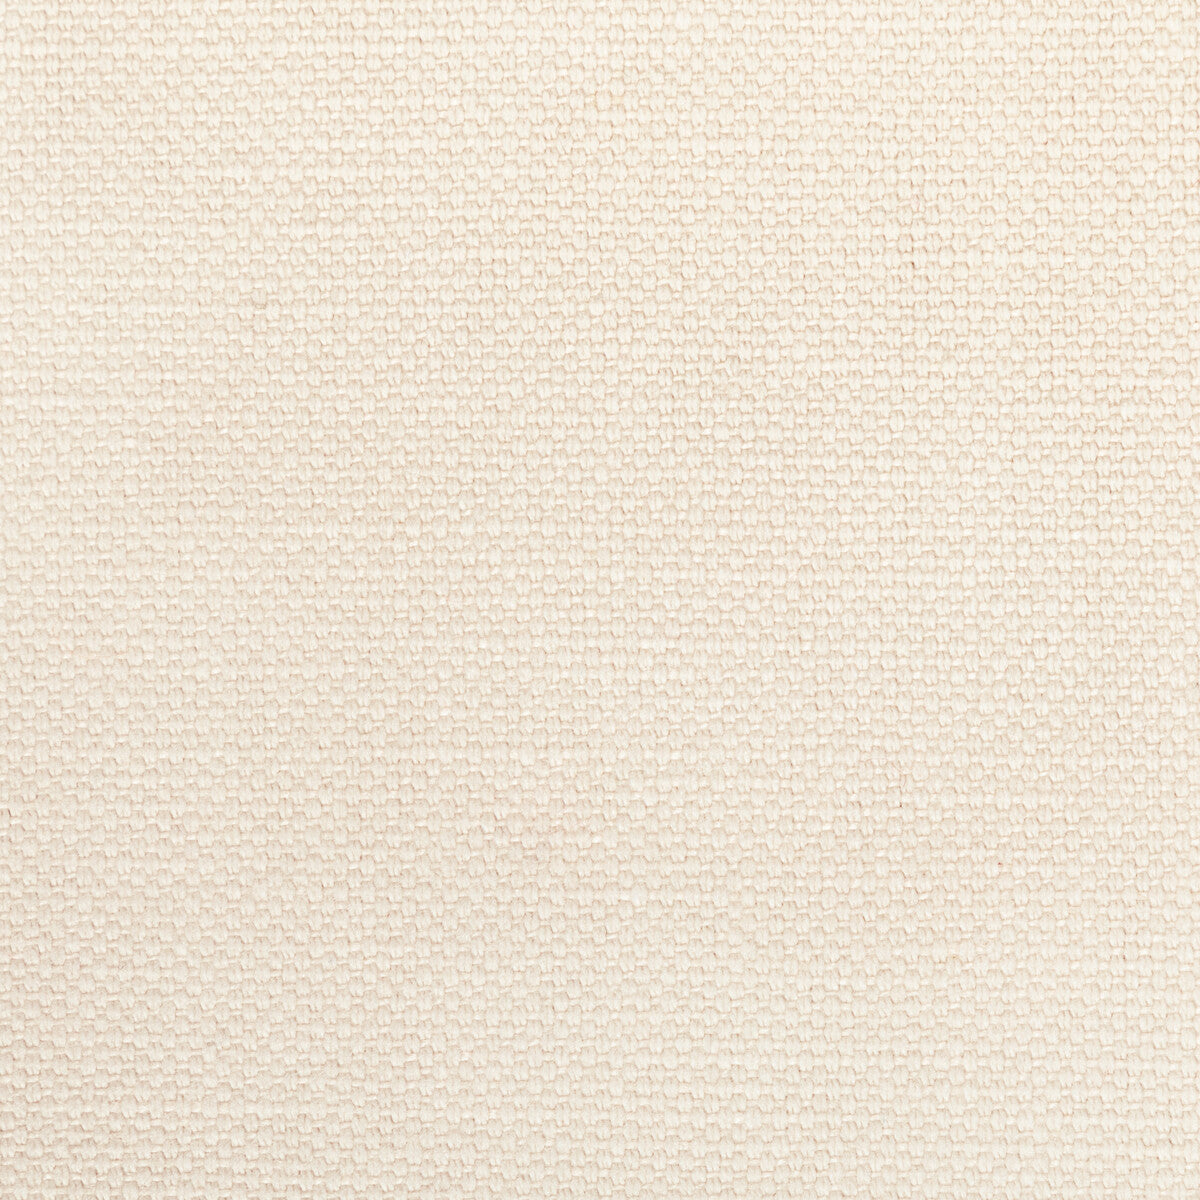 Carson fabric in cream color - pattern 36282.1001.0 - by Kravet Basics